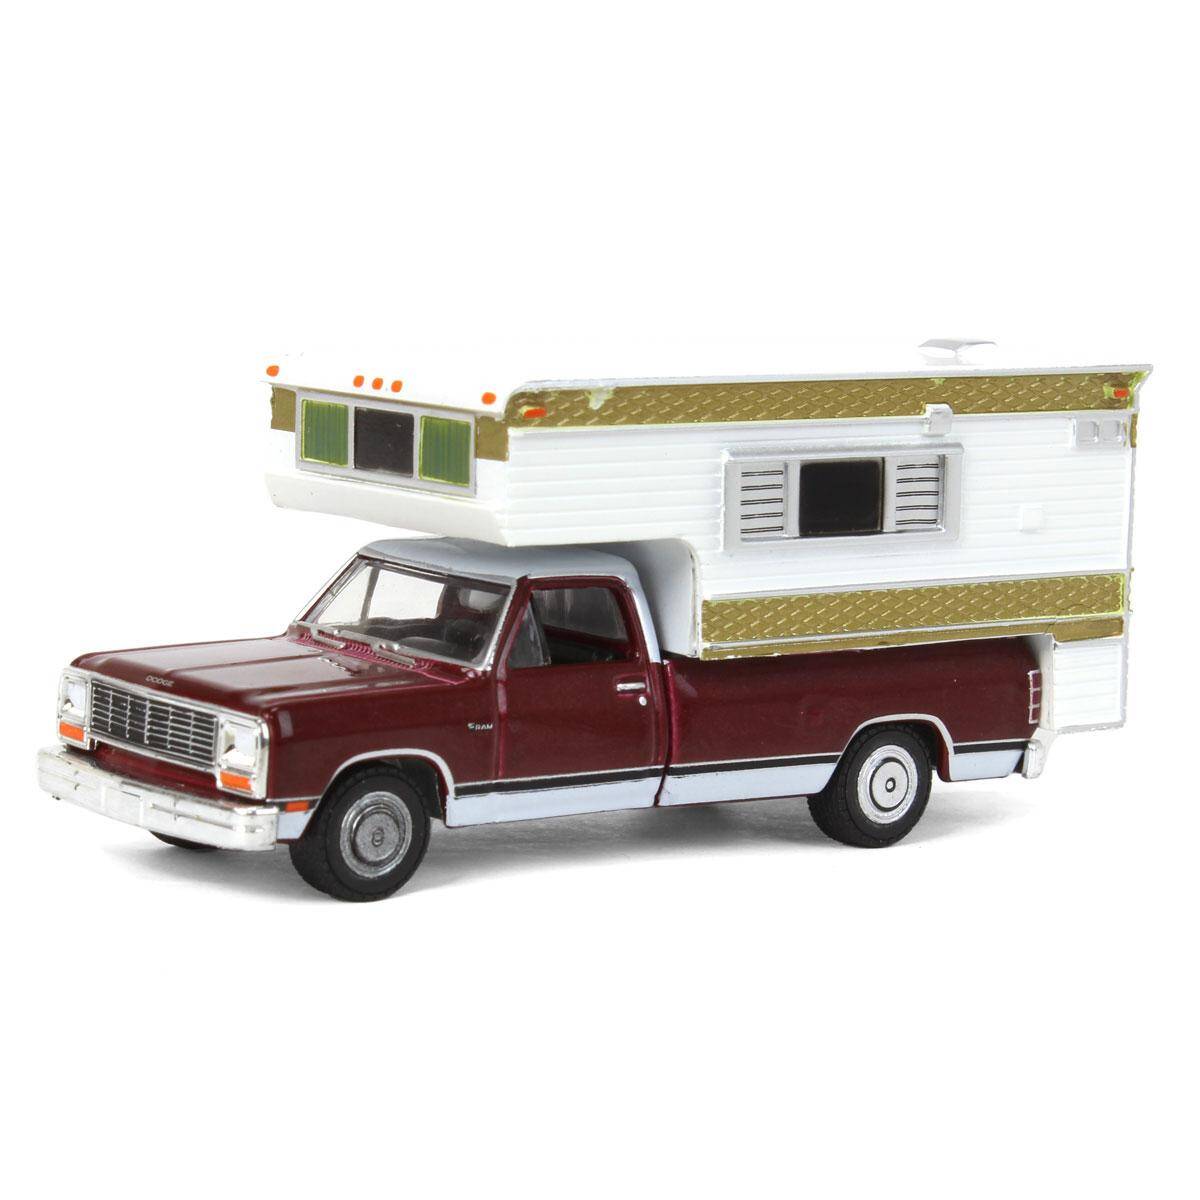 Greenlight 1/64 1981 Dodge Ram D-250 Royal with Large Camper - Medium Crimson Red and Pearl White 30409